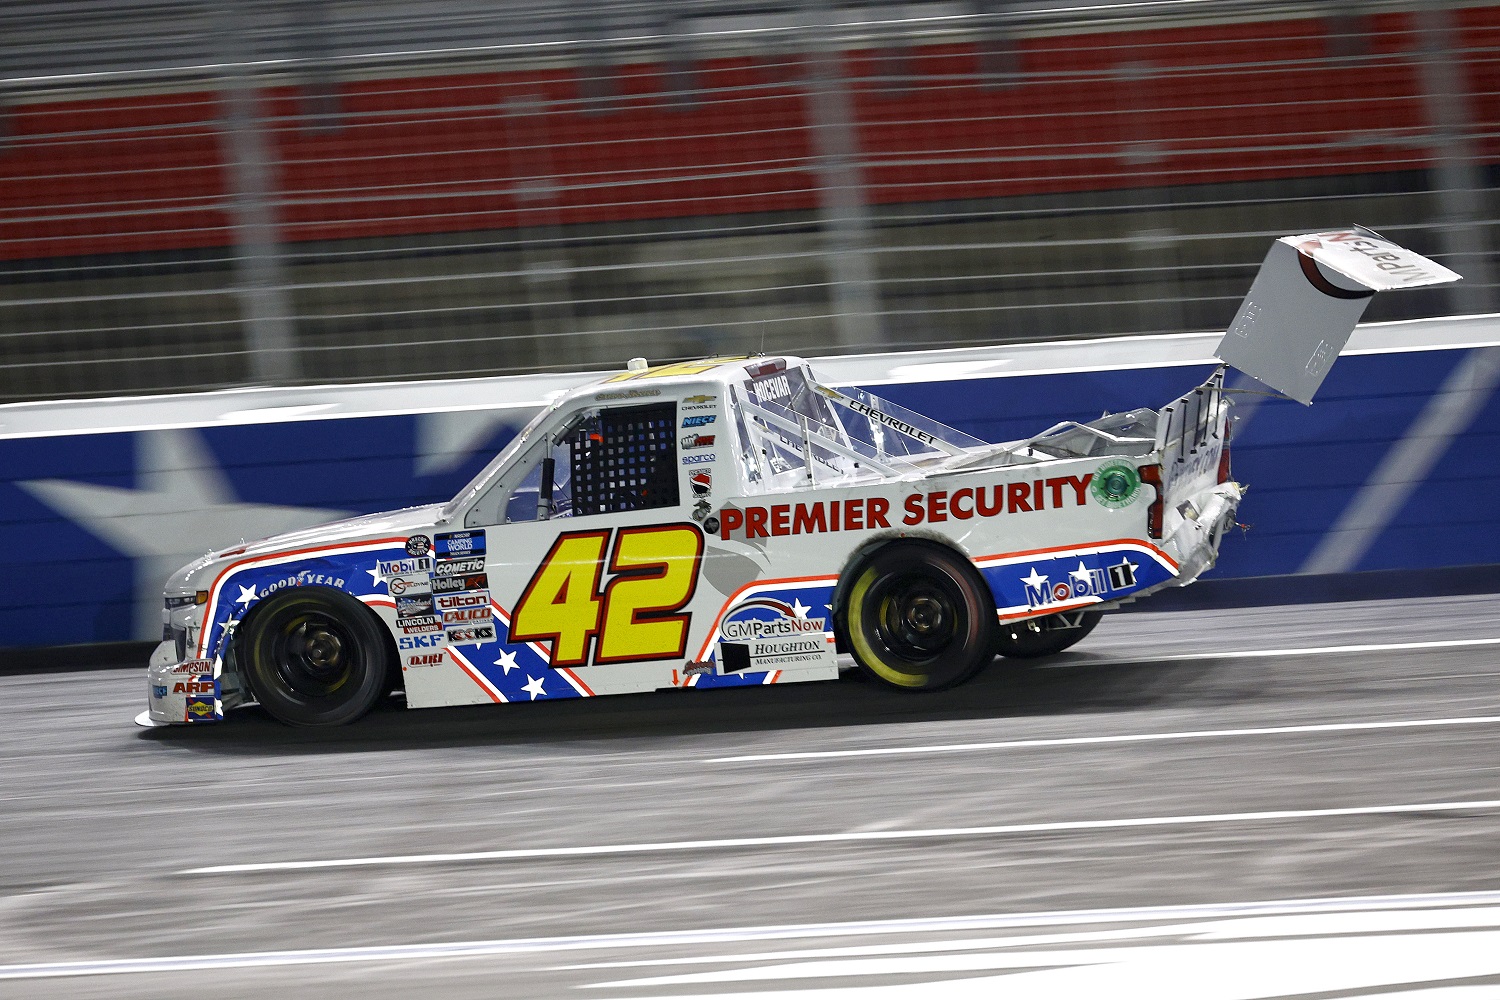 Carson Hocevar drives a damaged truck after an on-track incident during the NASCAR Camping World Truck Series North Carolina Education Lottery 200 at Charlotte Motor Speedway on May 27, 2022. | Jared C. Tilton/Getty Images